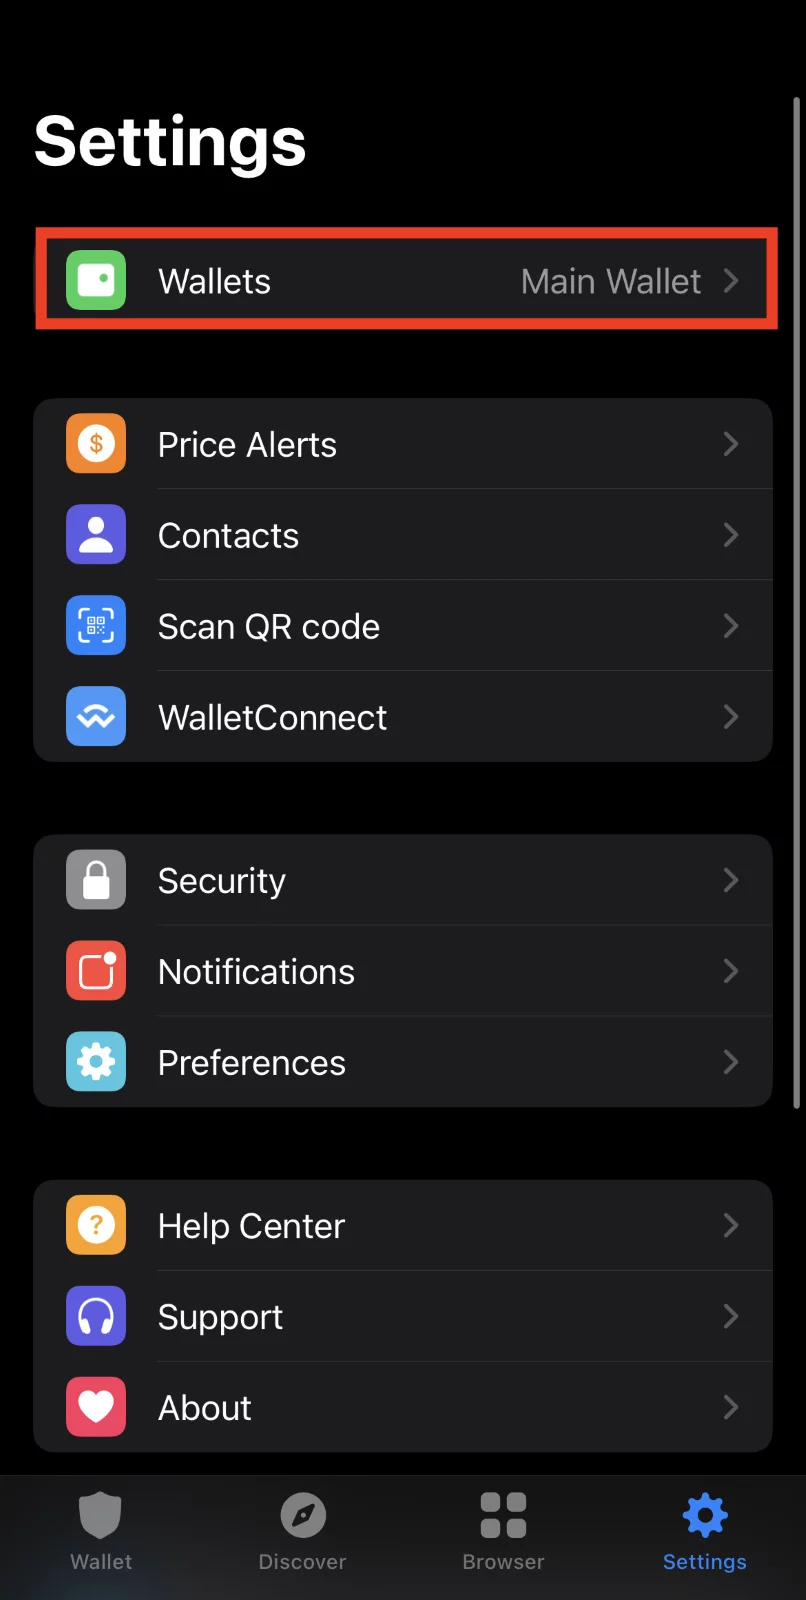 Step 2. Navigate to the "Wallets" Option in the Menu 